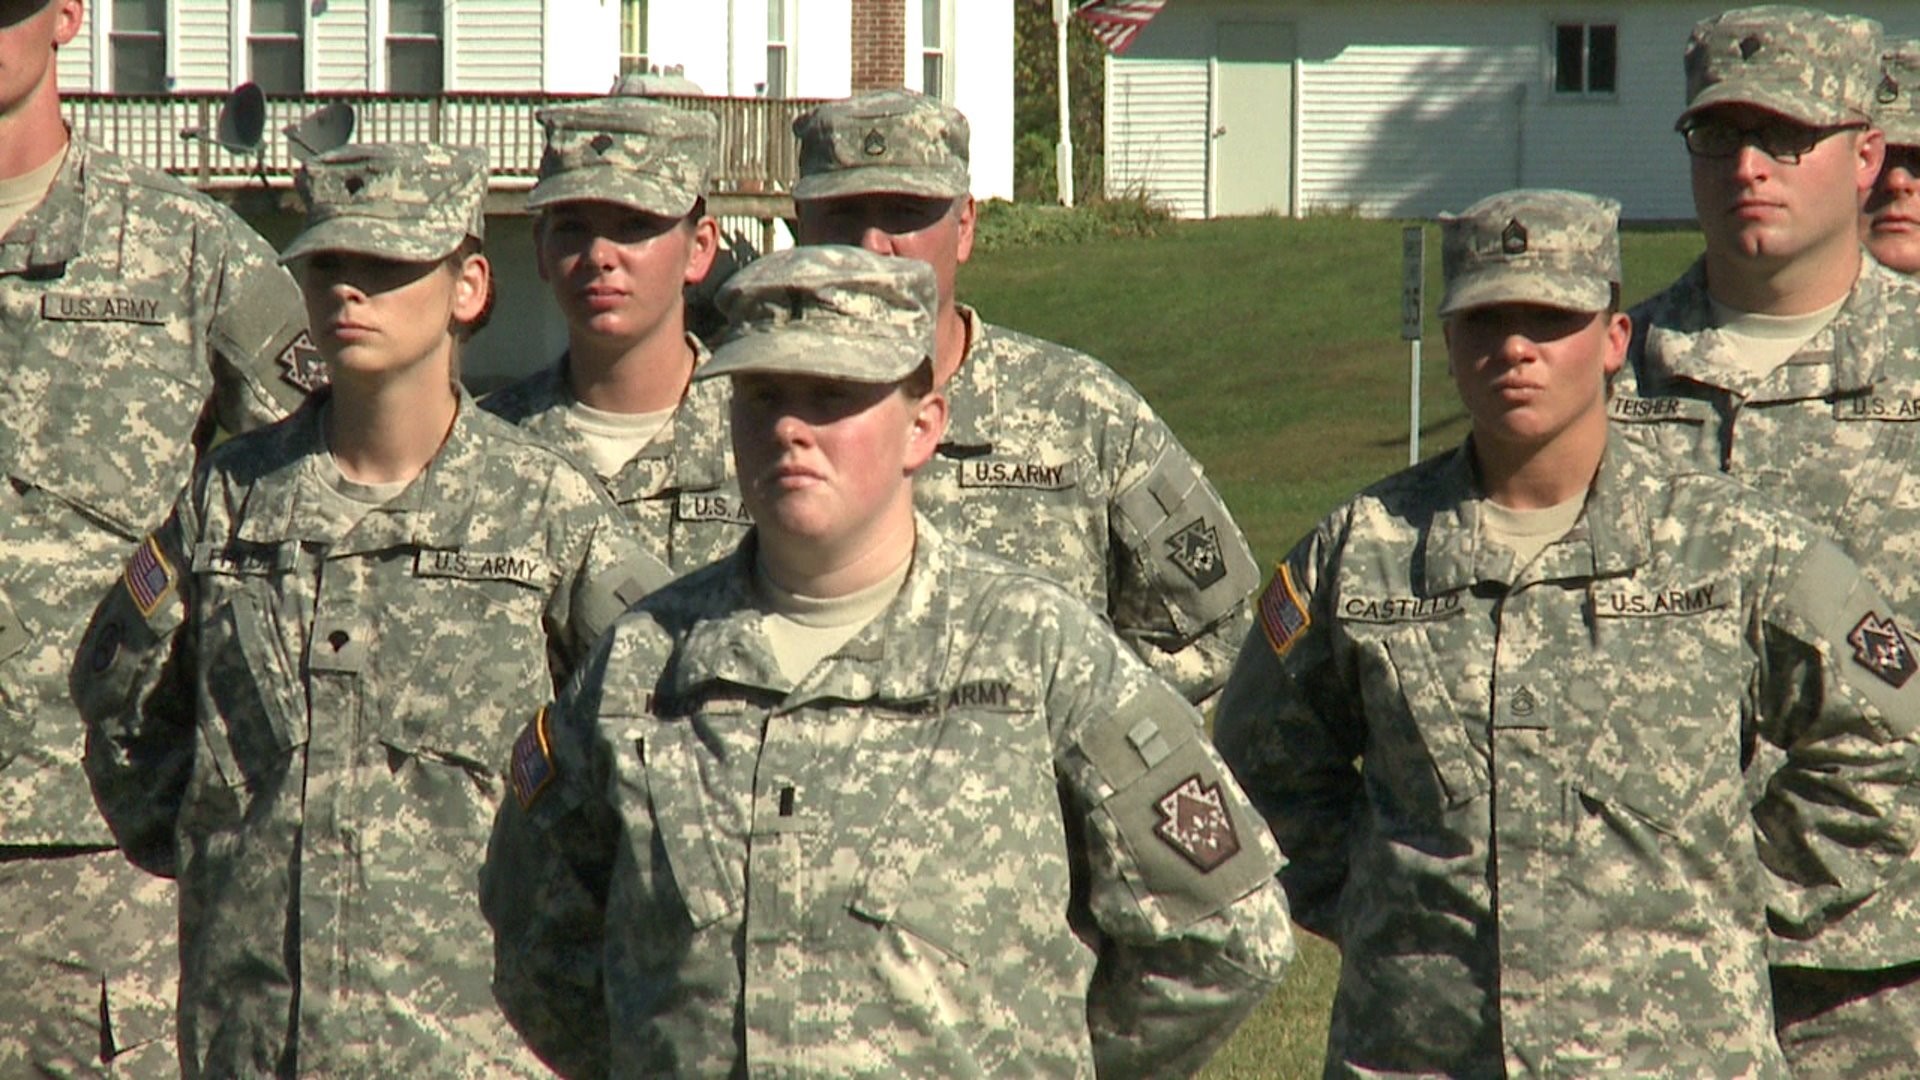 PA National Guard troops to deploy overseas